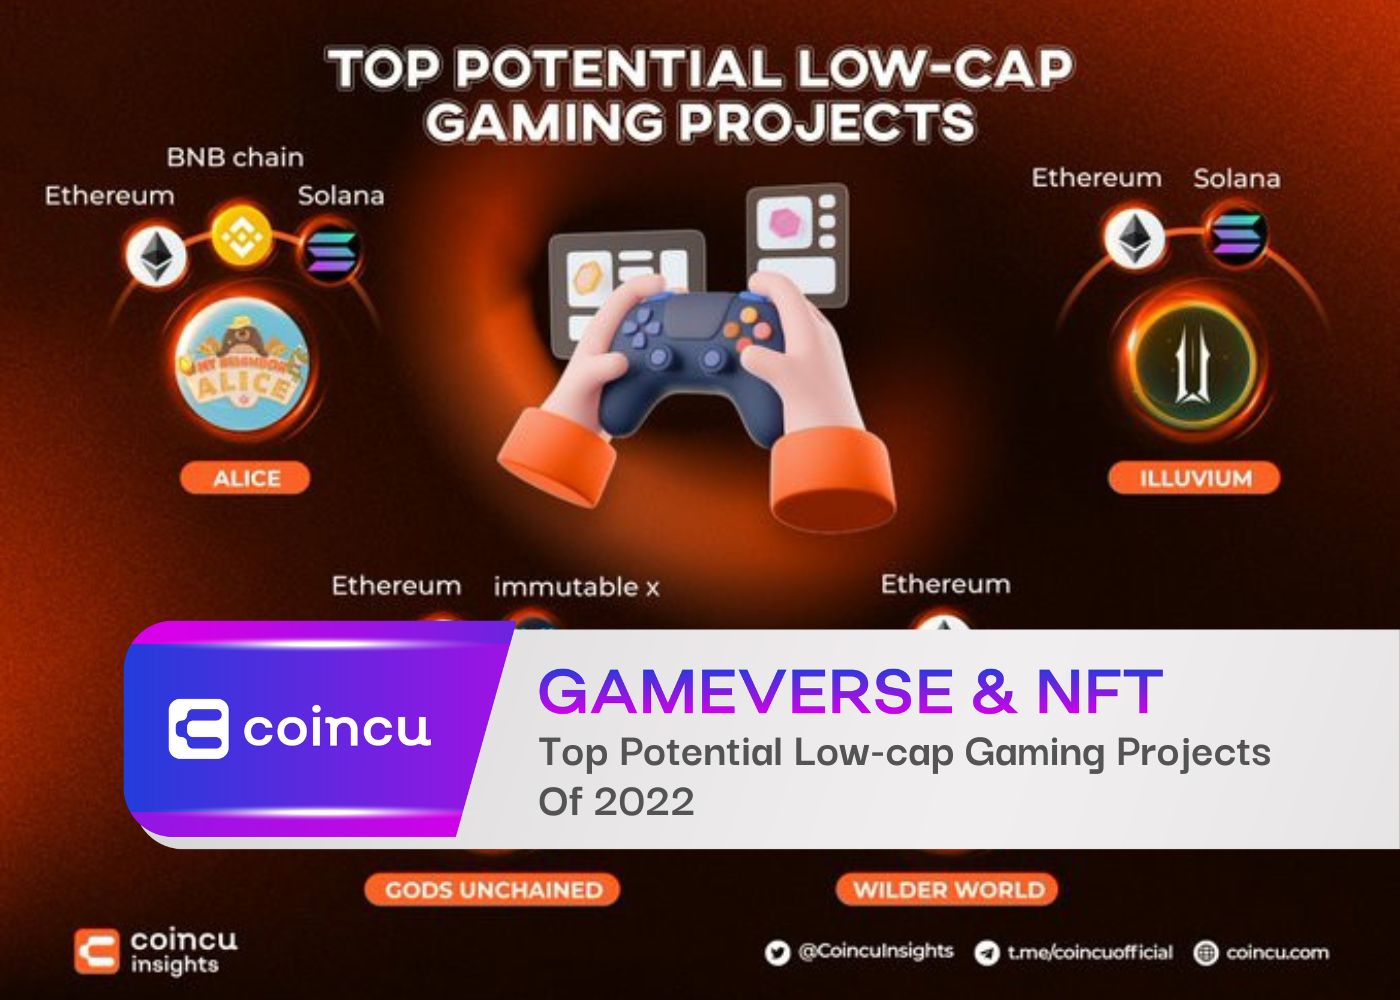 Top Potential Low-cap Gaming Projects